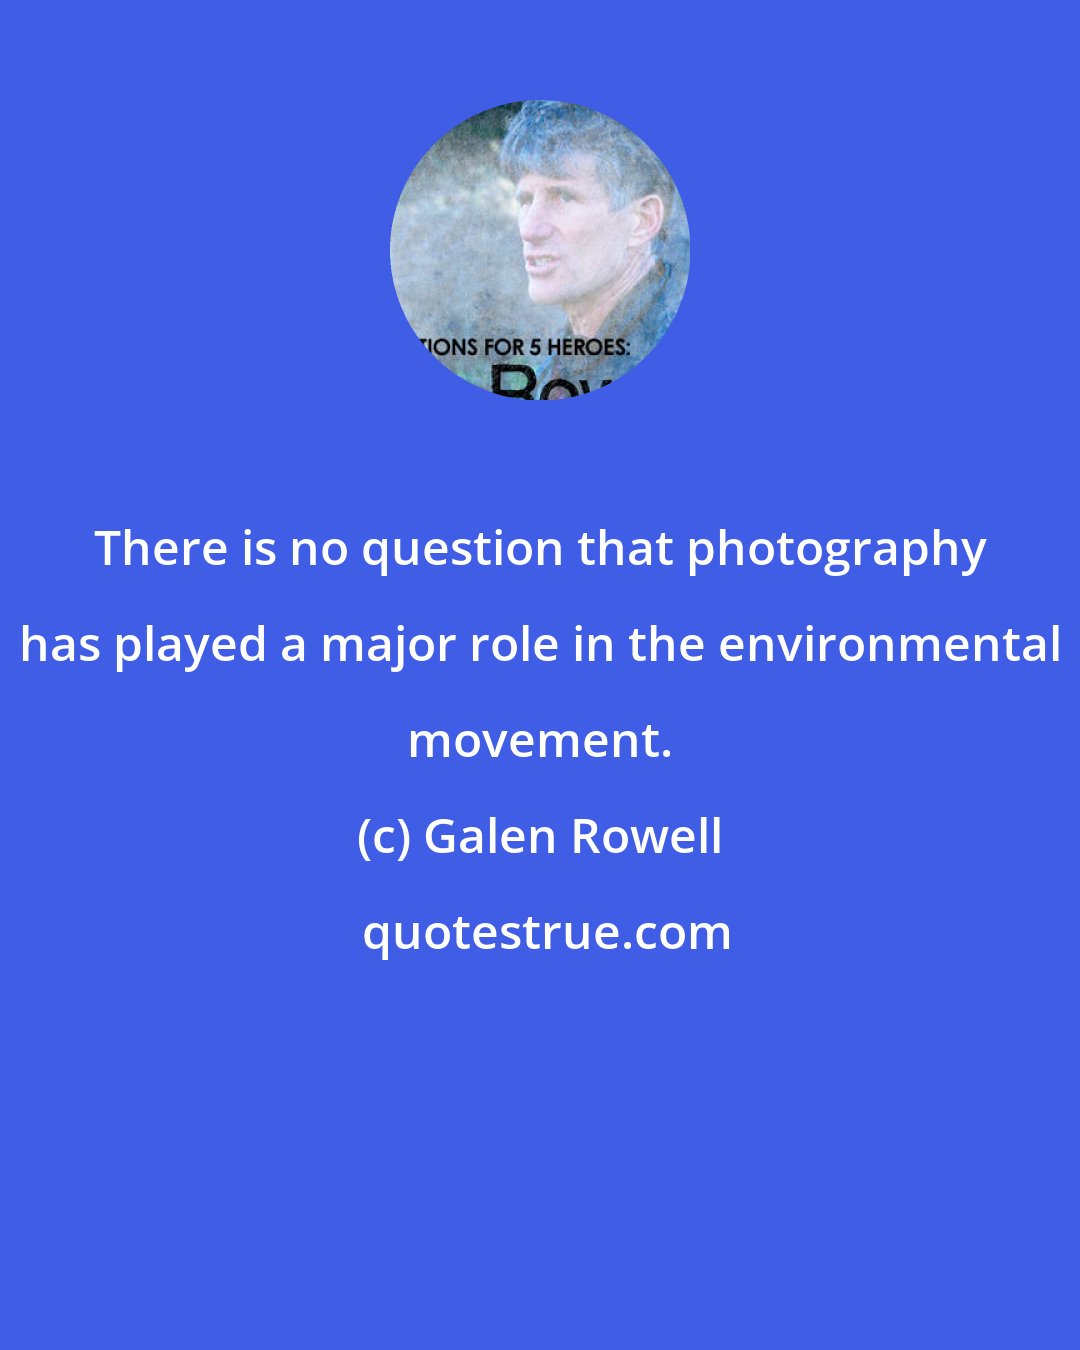 Galen Rowell: There is no question that photography has played a major role in the environmental movement.